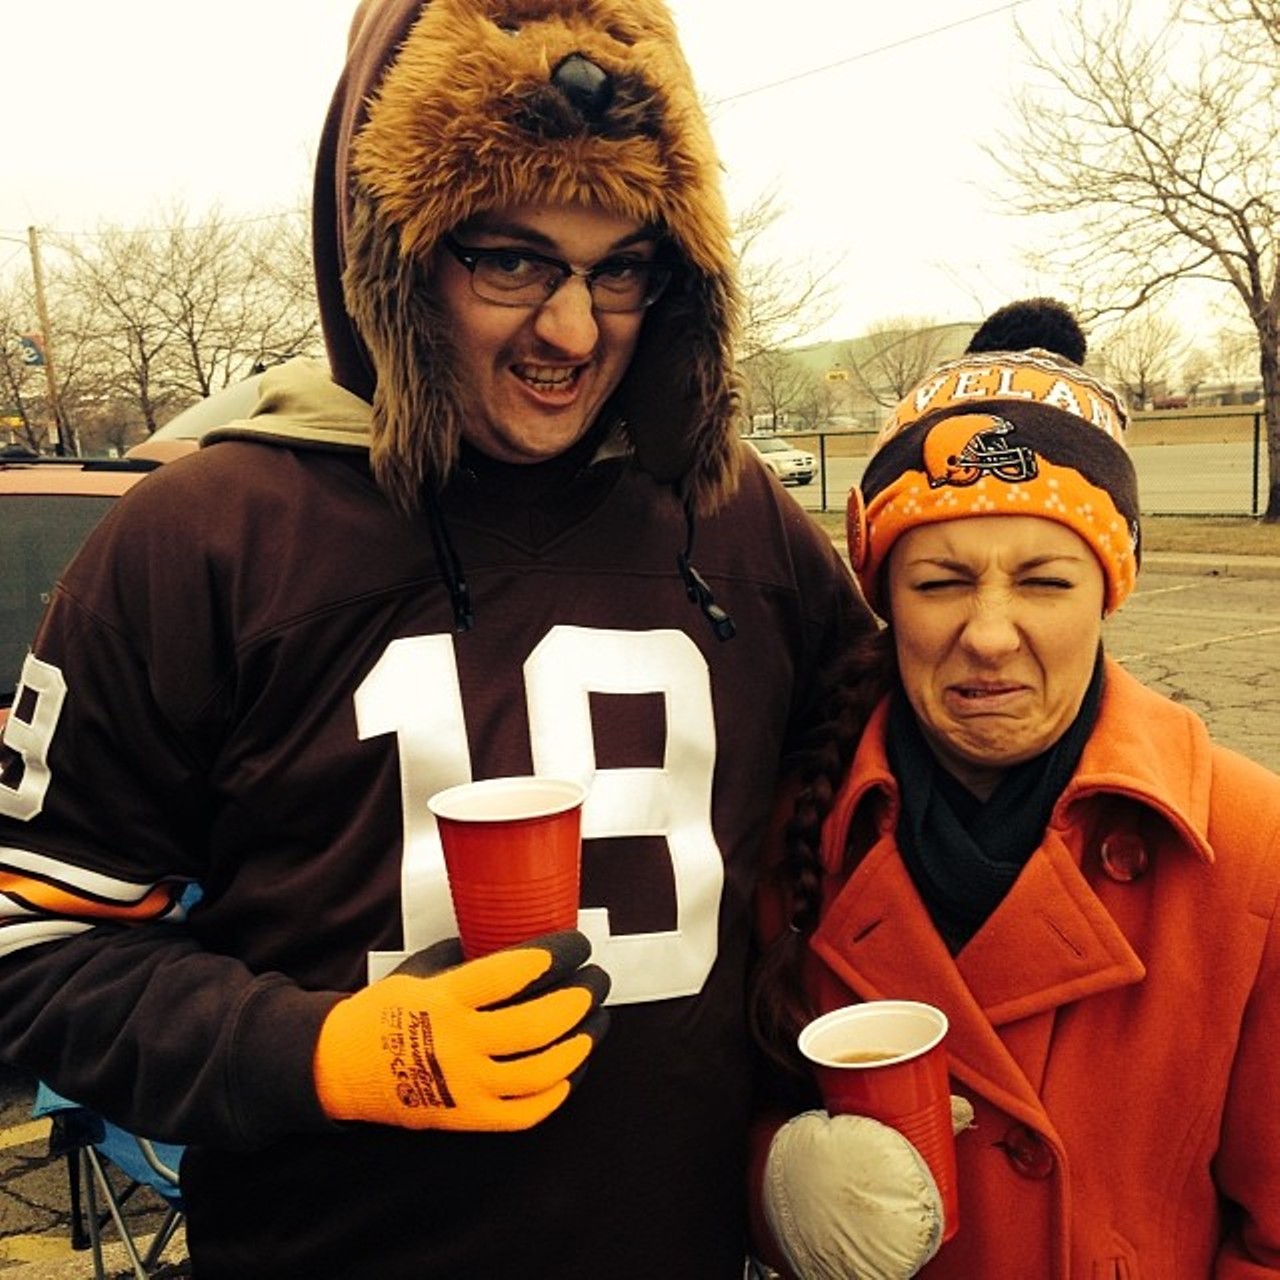 Those faces. #browns #tailgating #cleveland